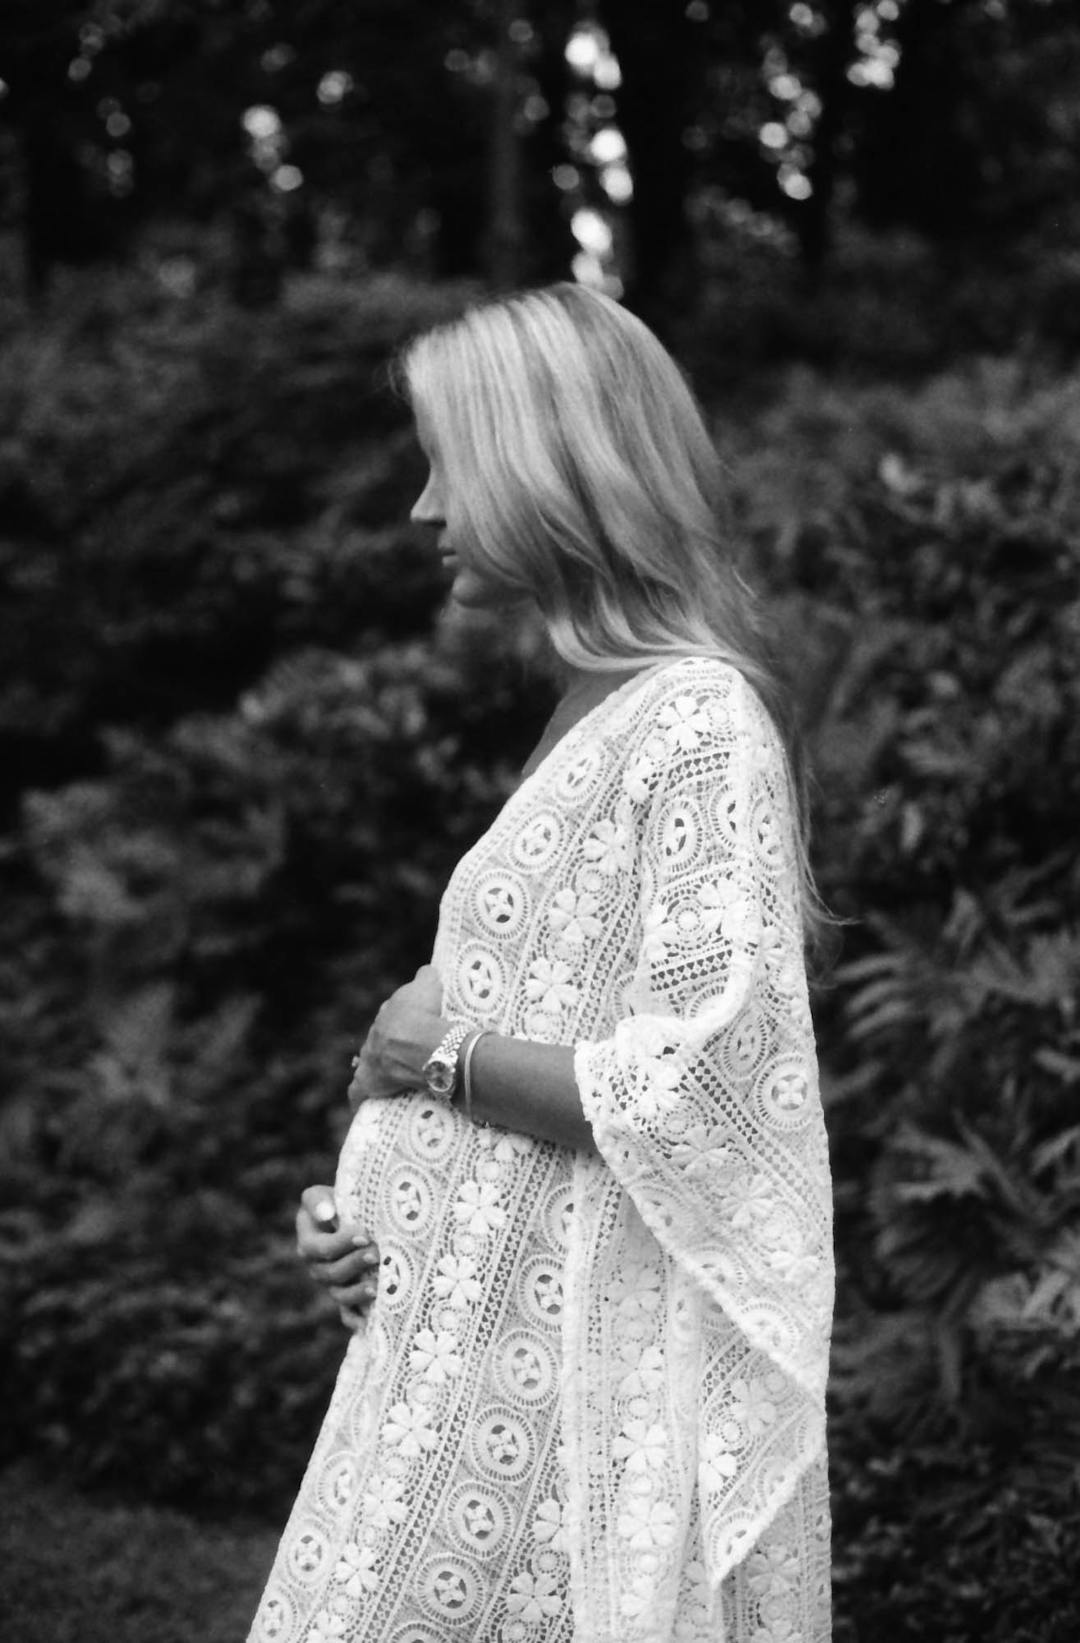 black and white medium format maternity portrait in profile of woman in white dress 